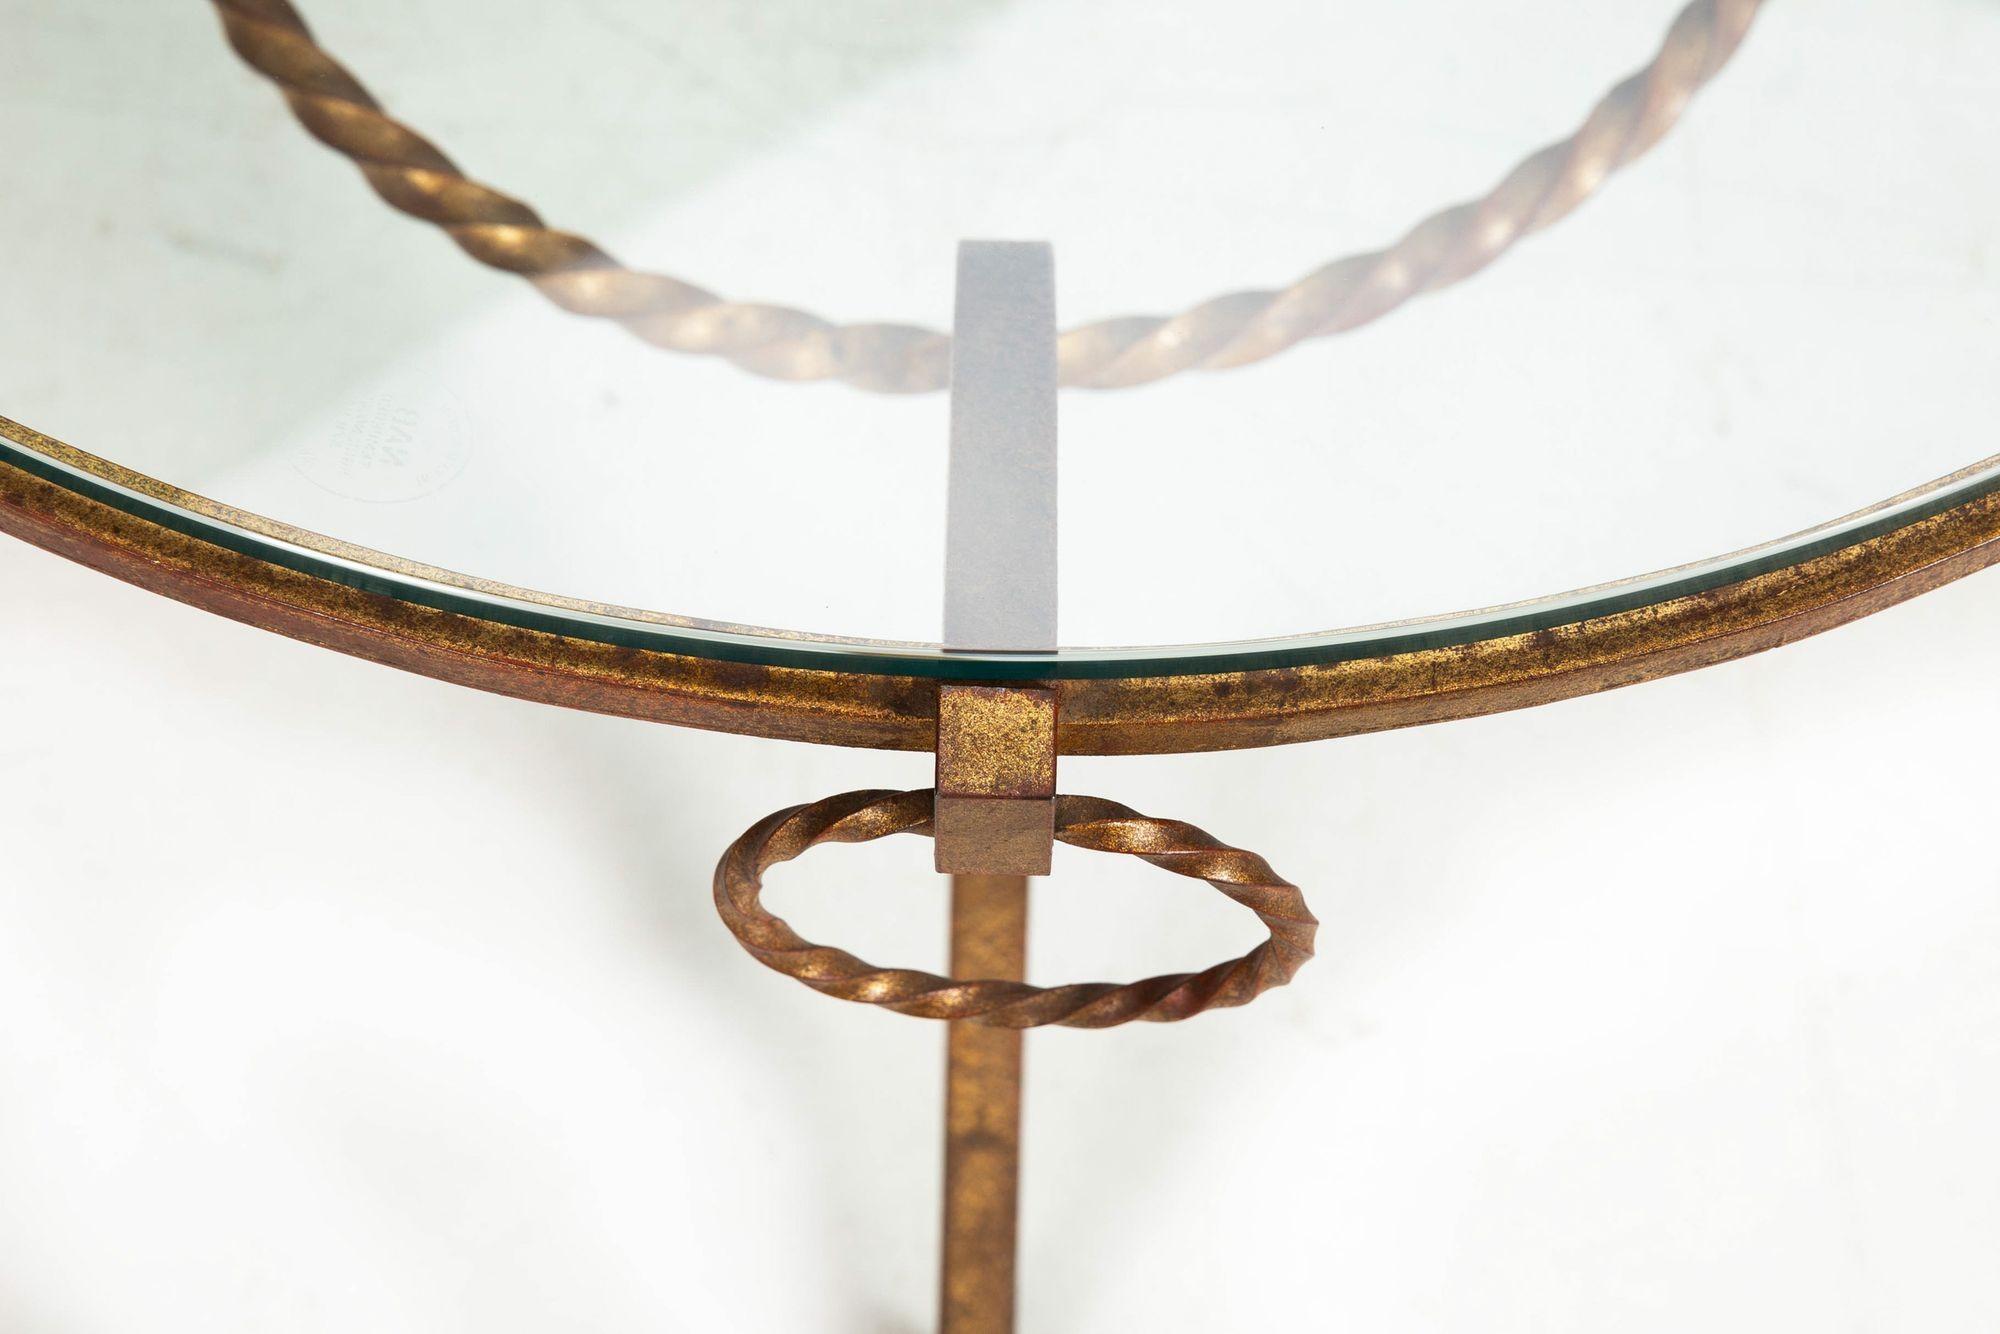 French Modernist Gilded Wrought-Iron & Glass Coffee Accent Table ca. 1950s For Sale 2